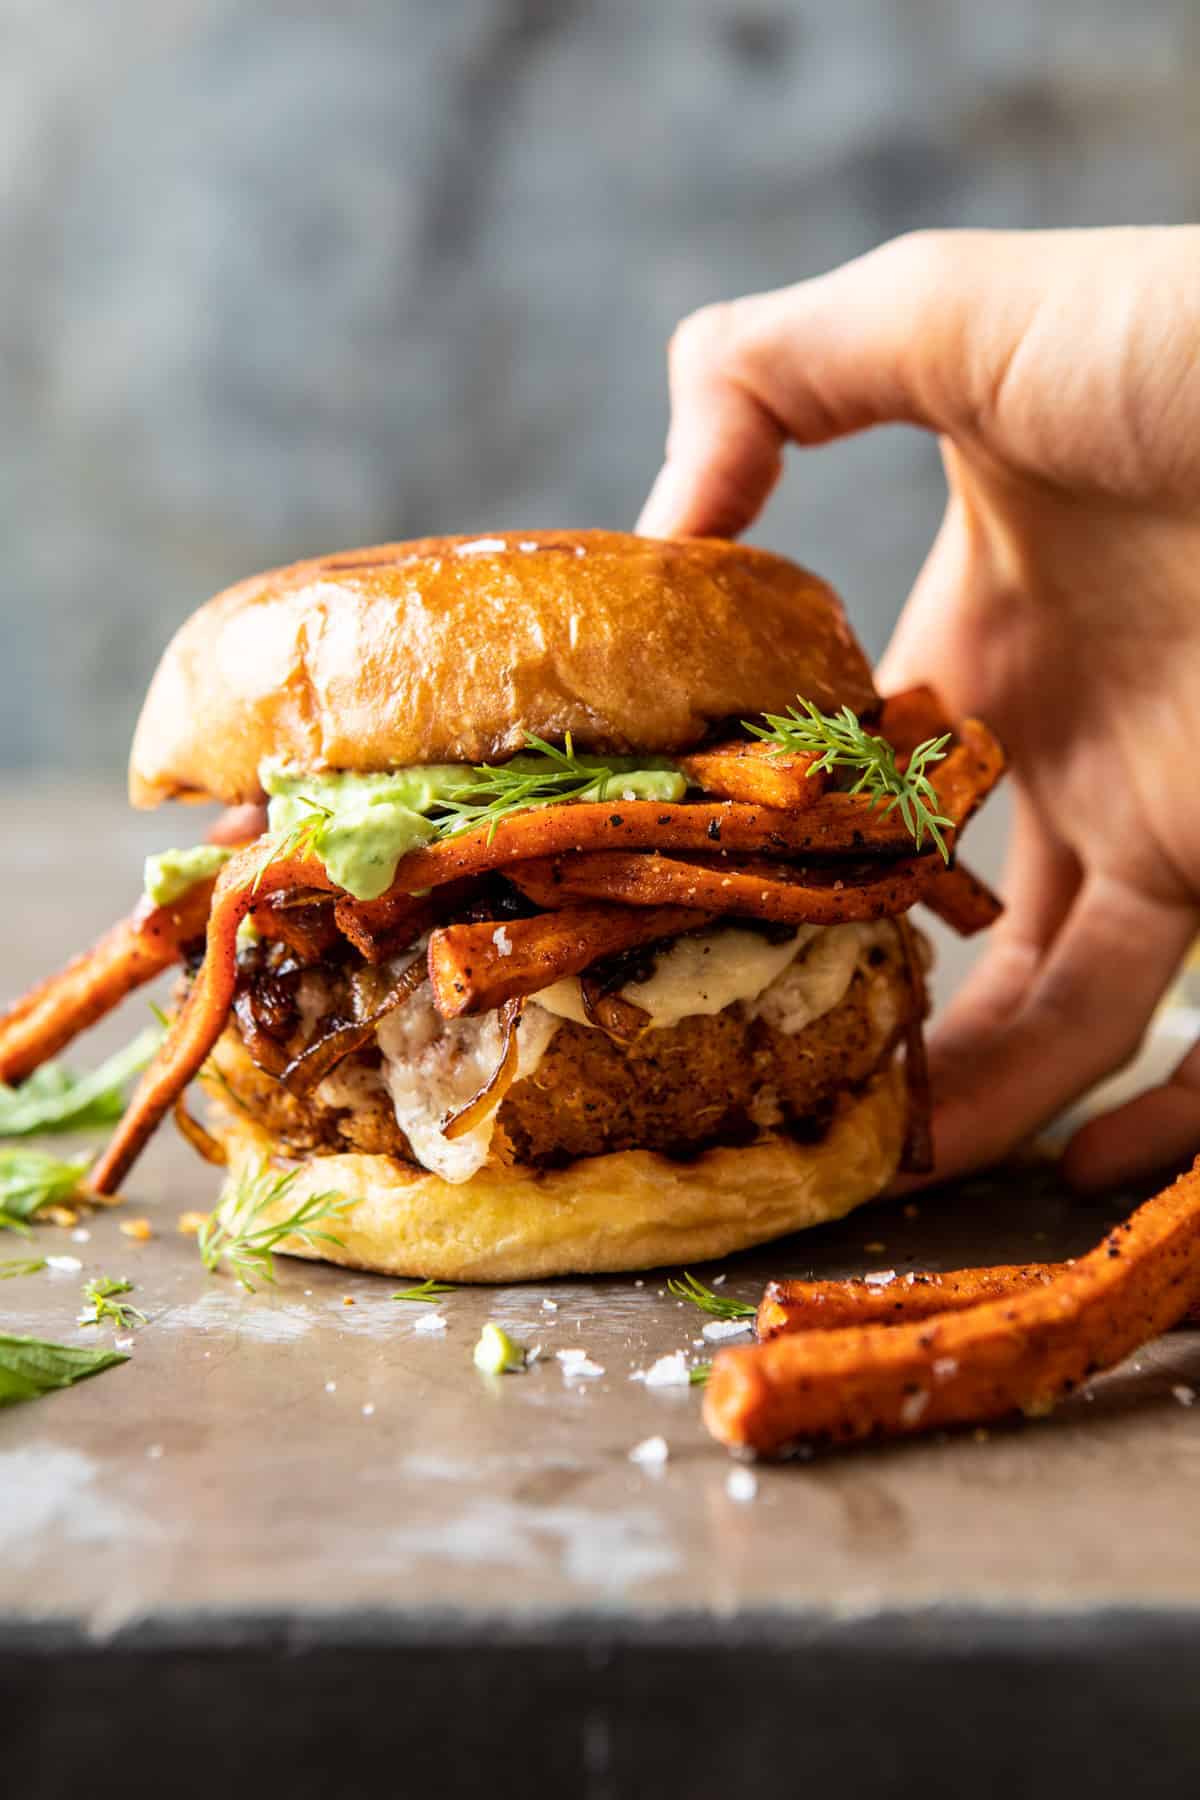 Crispy Quinoa Burgers Topped with Sweet Potato Fries and Beer Caramelized Onions | halfbakedharvest.com #quinoaburger